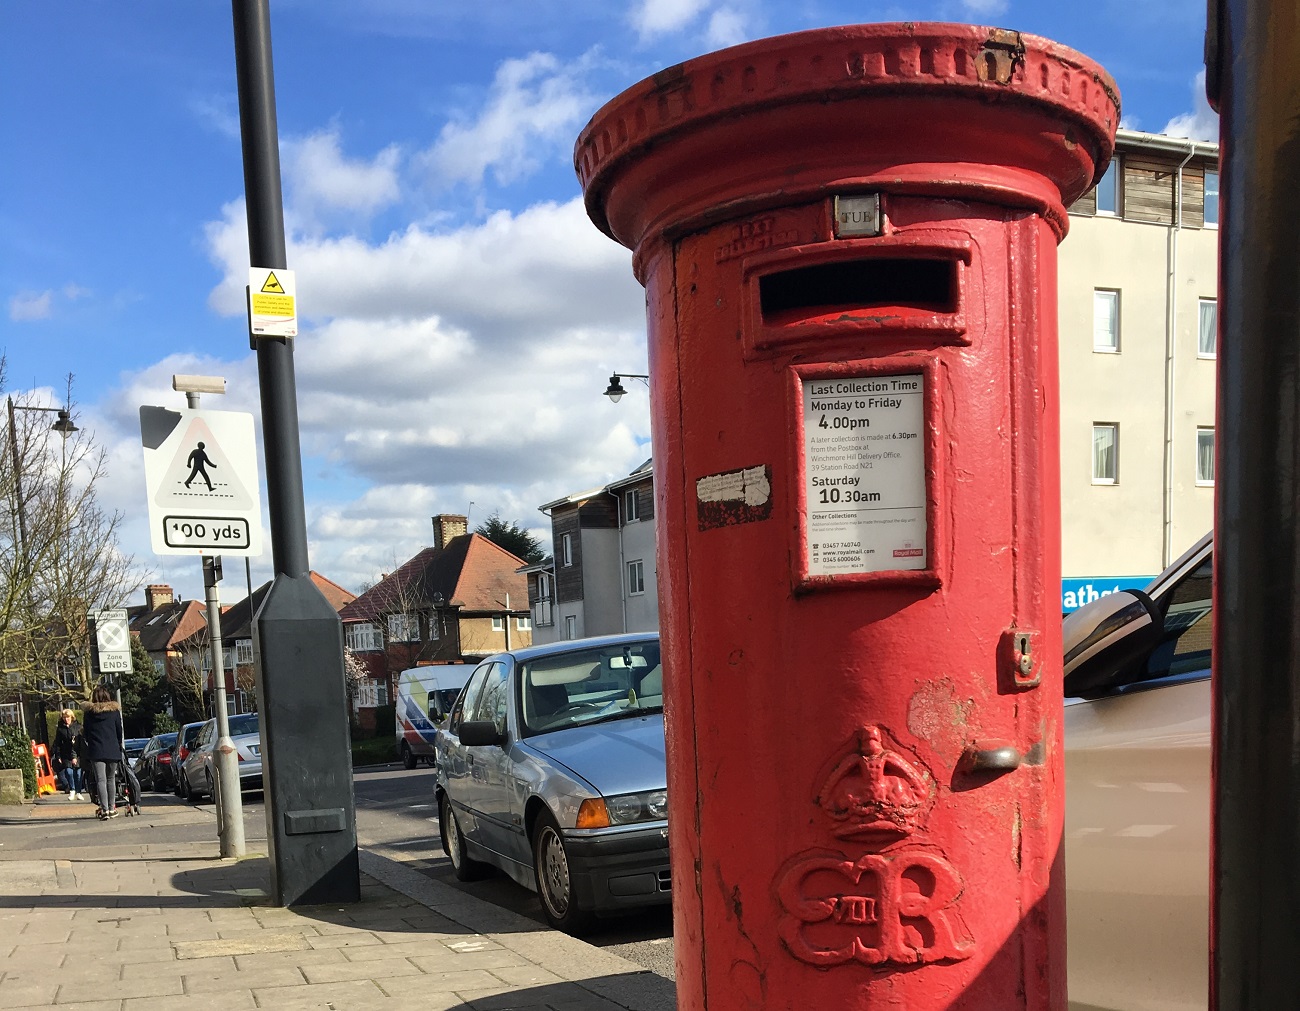 A rare postbox marked with the emblem of Edward VIII in Dennis Parade, Southgate (credit David Chandler)